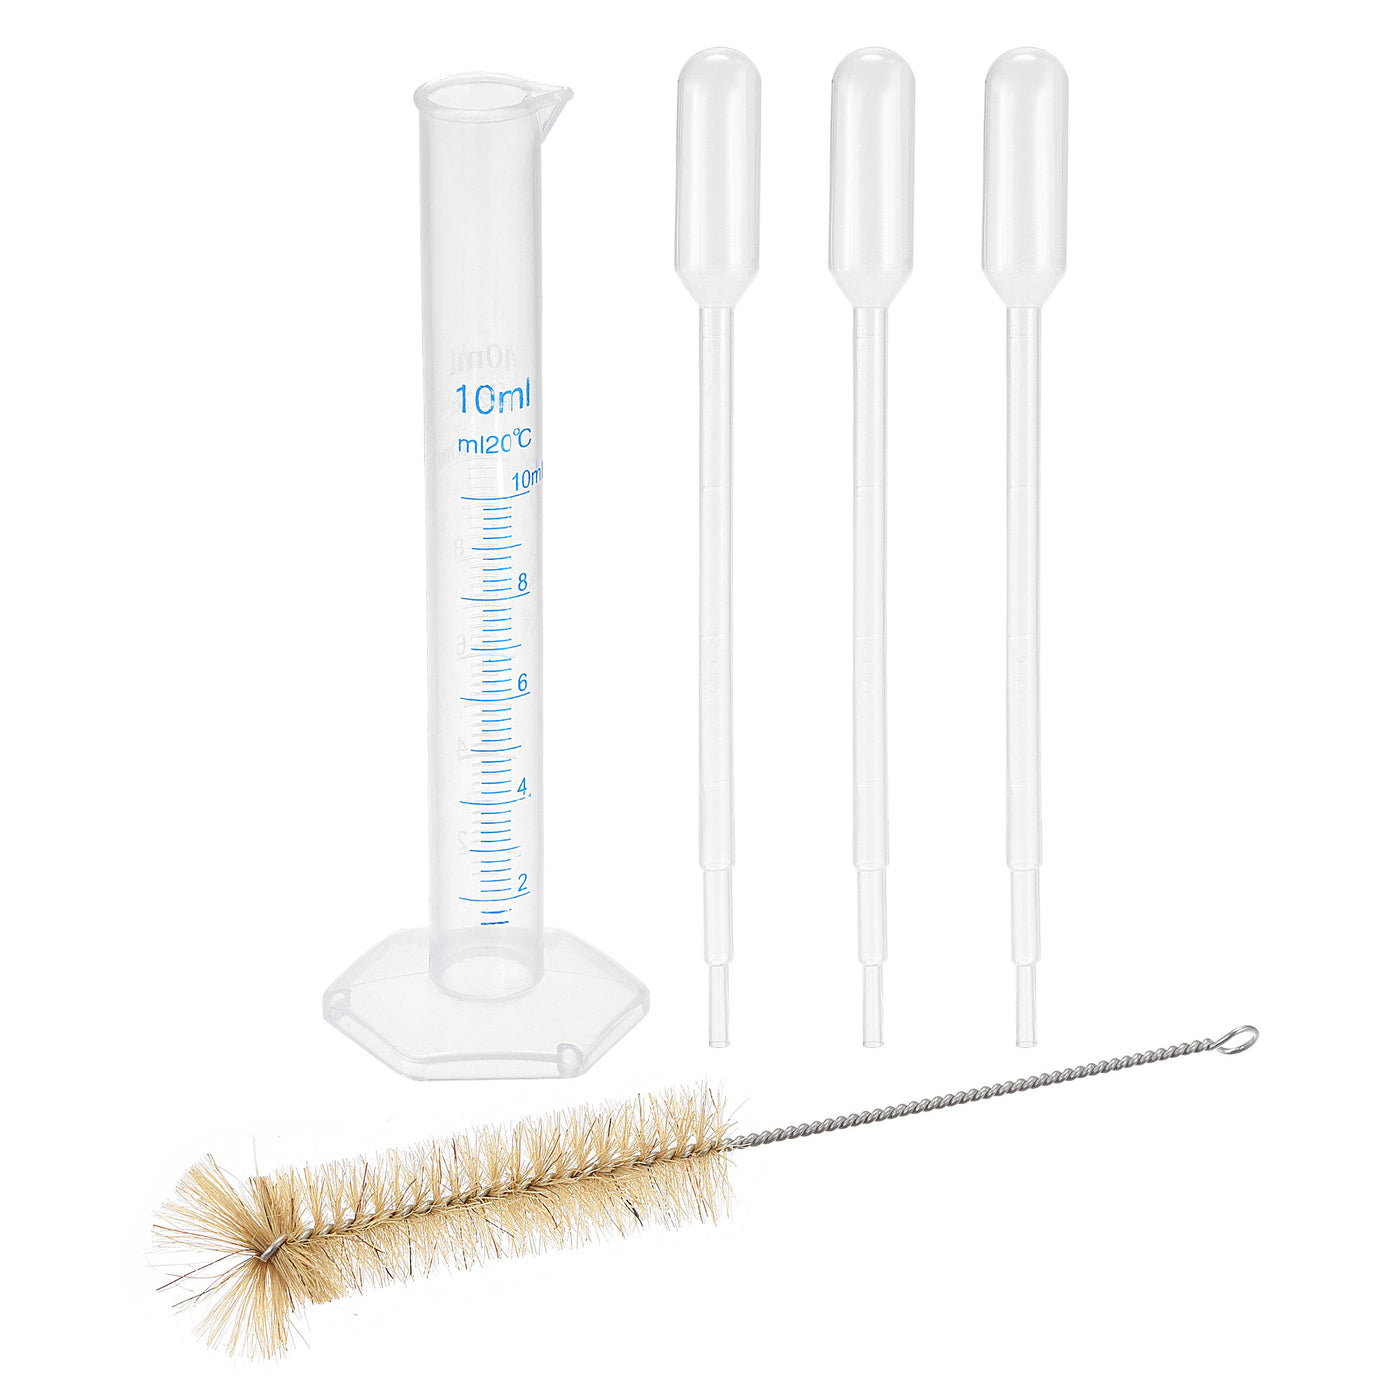 uxcell Uxcell Plastic Graduated Cylinder, 10ml Measuring Cylinder with 3 Transfer Pipettes and 1 Brush, 5in1 Set for Science Lab